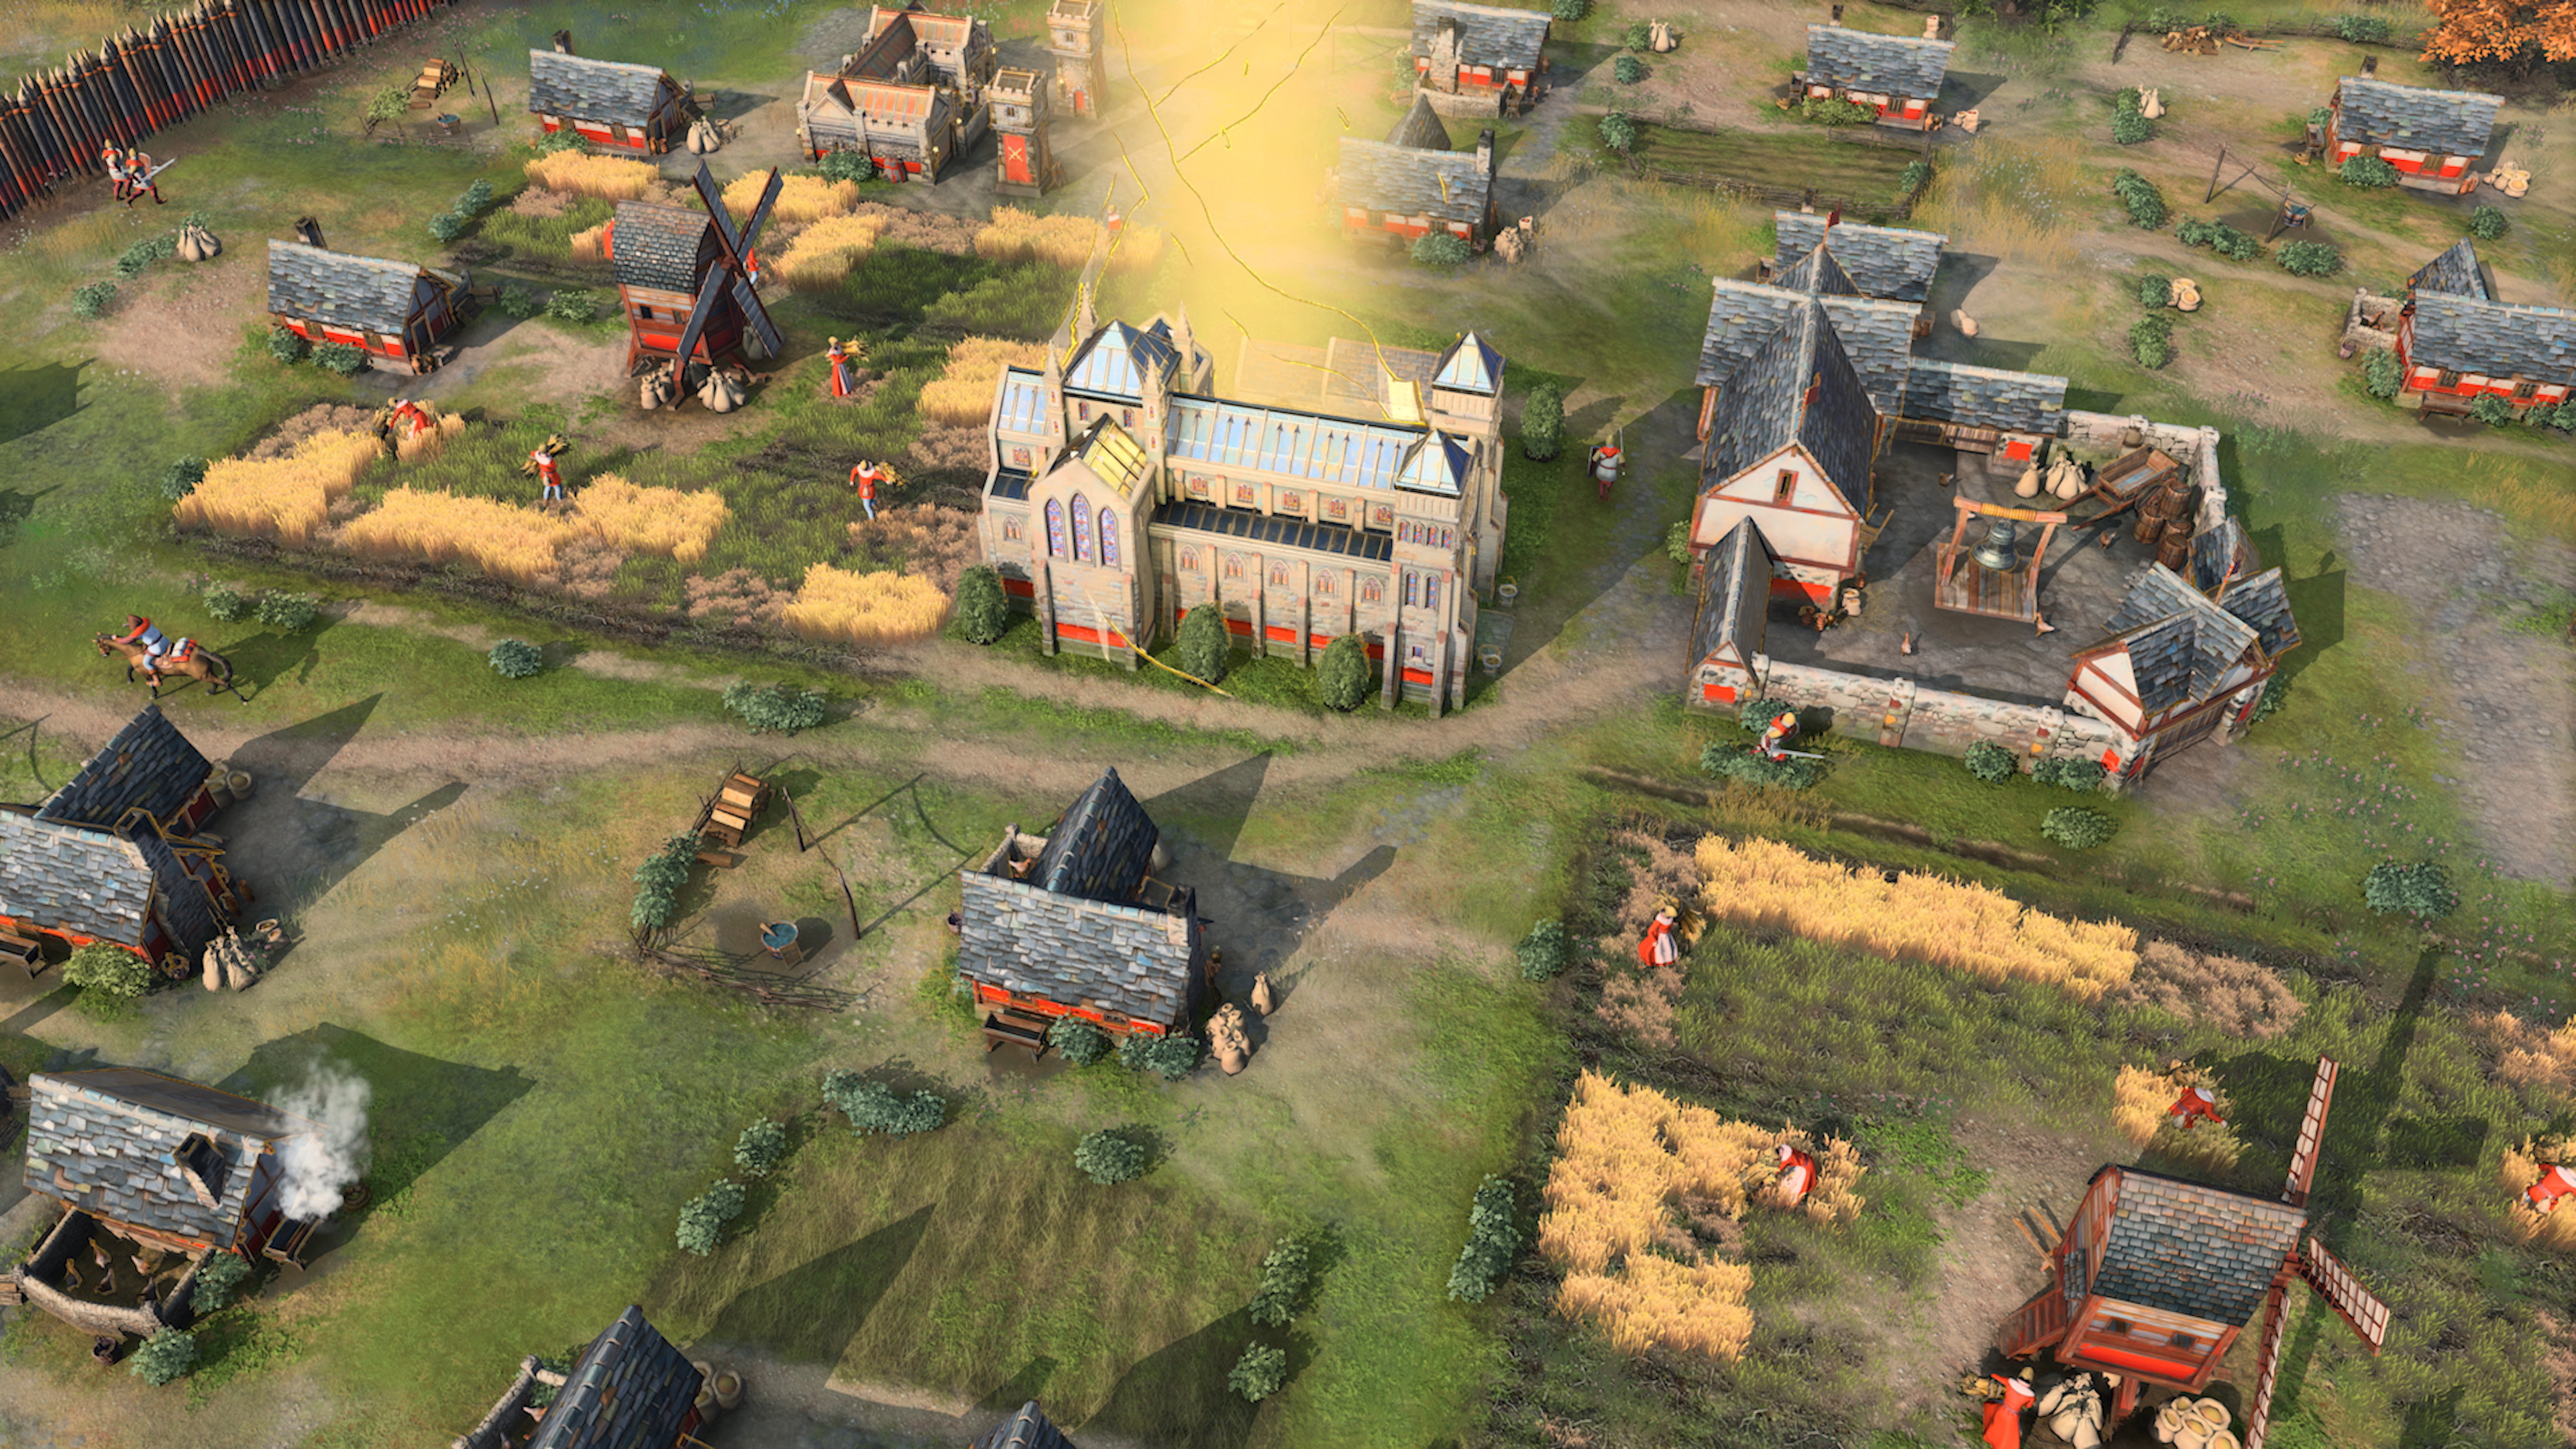 New Screenshots People New Screenshots Age Of Empires Iv Age Of Empires Forum